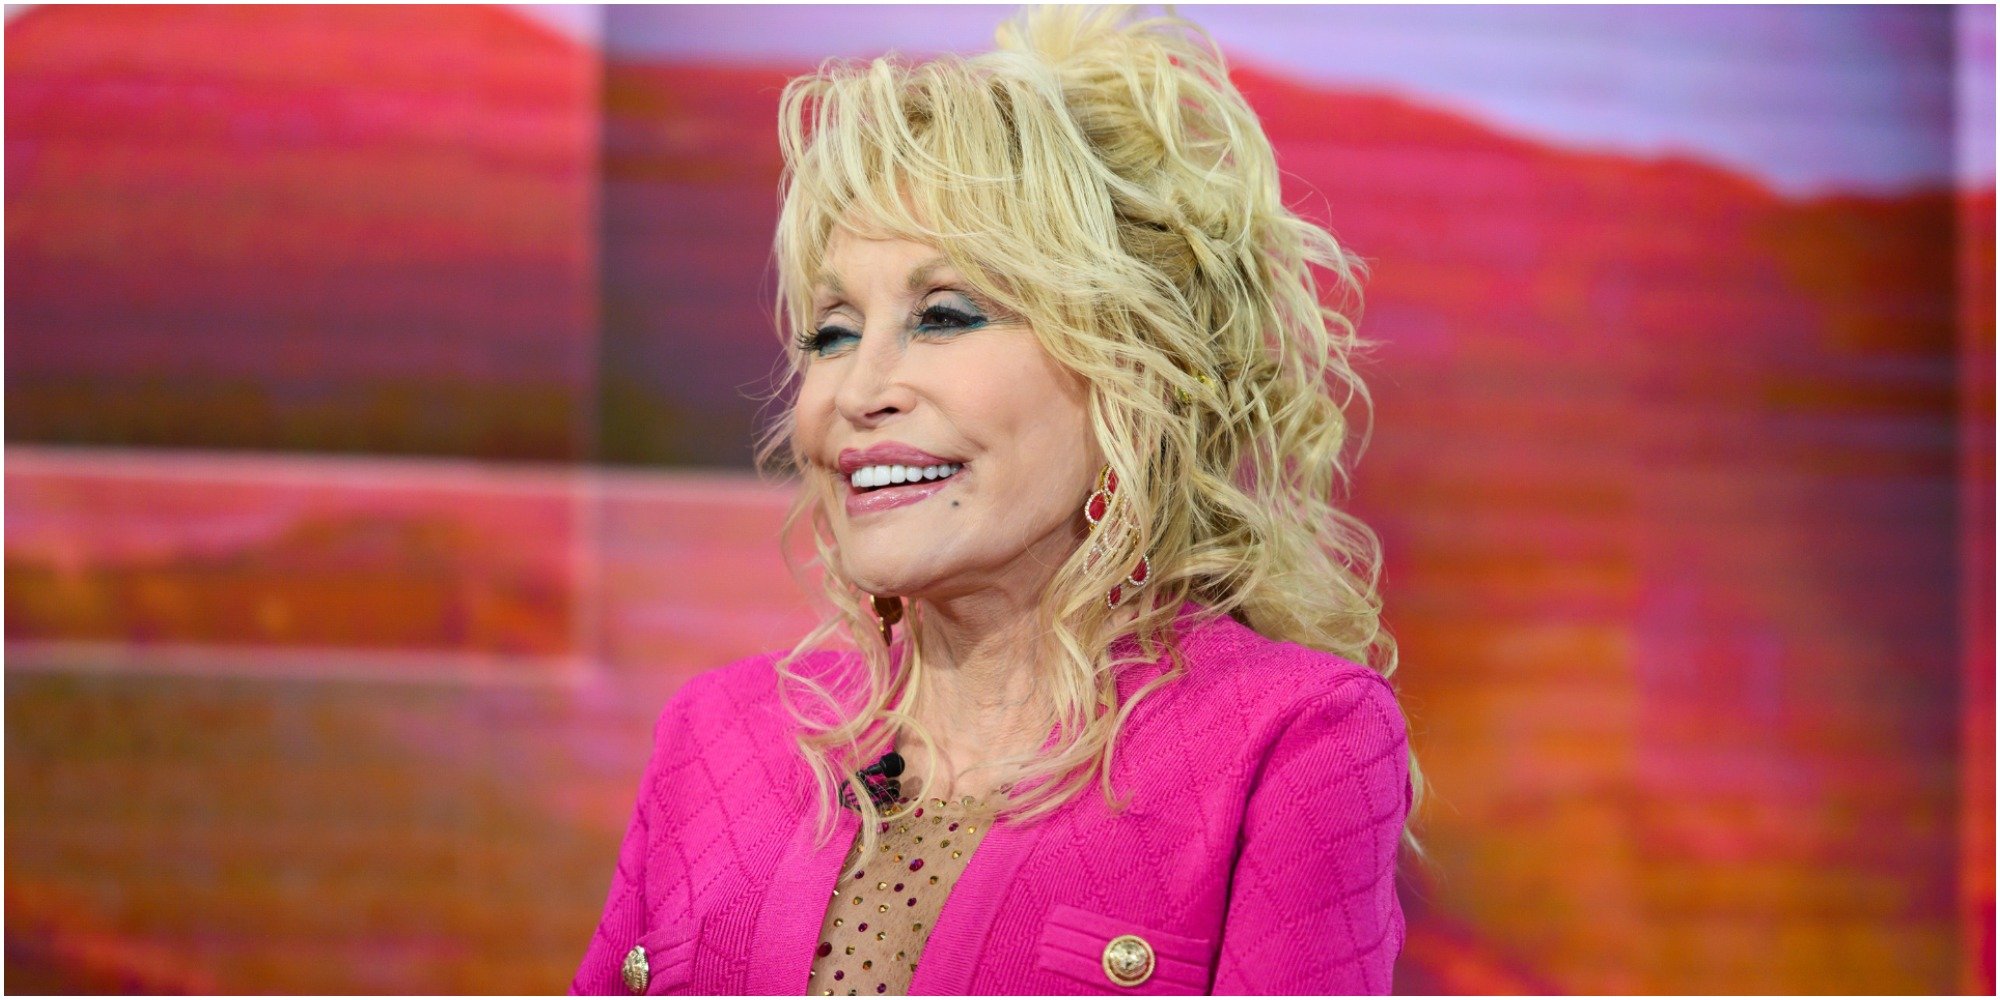 Dolly Parton wears a pink suit and smiles for the camera.